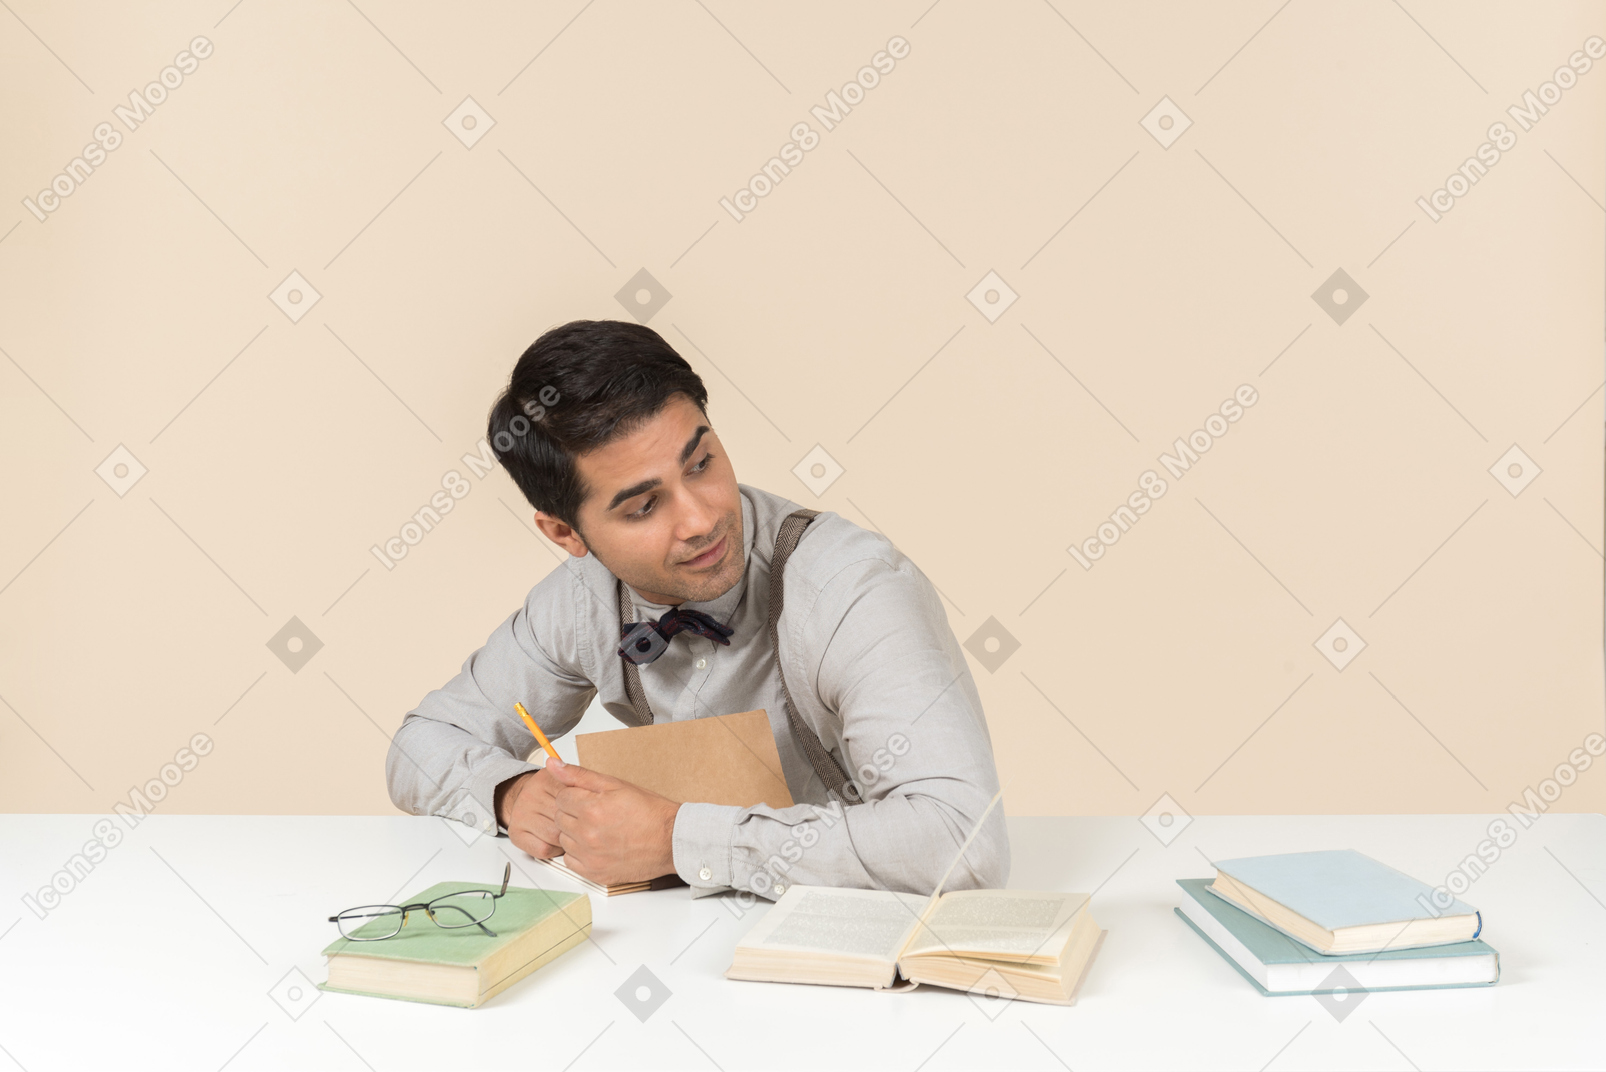 Young adult student sitting at the table and writing something down in the book